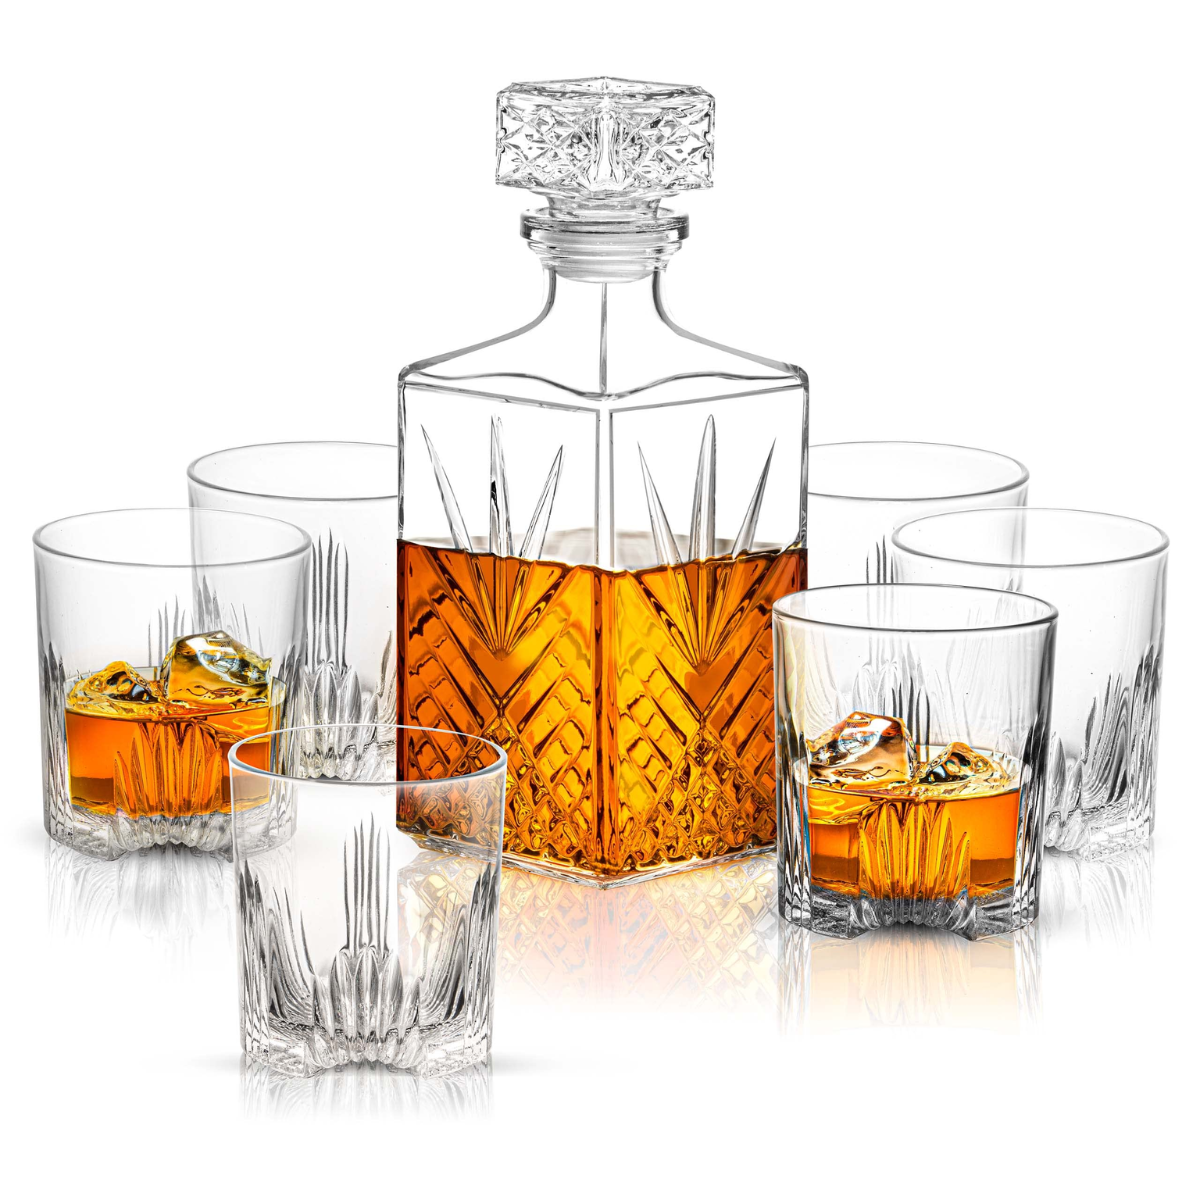 12. Raise a Toast to 10 Years of Love with this Unique Crystal Decanter Set